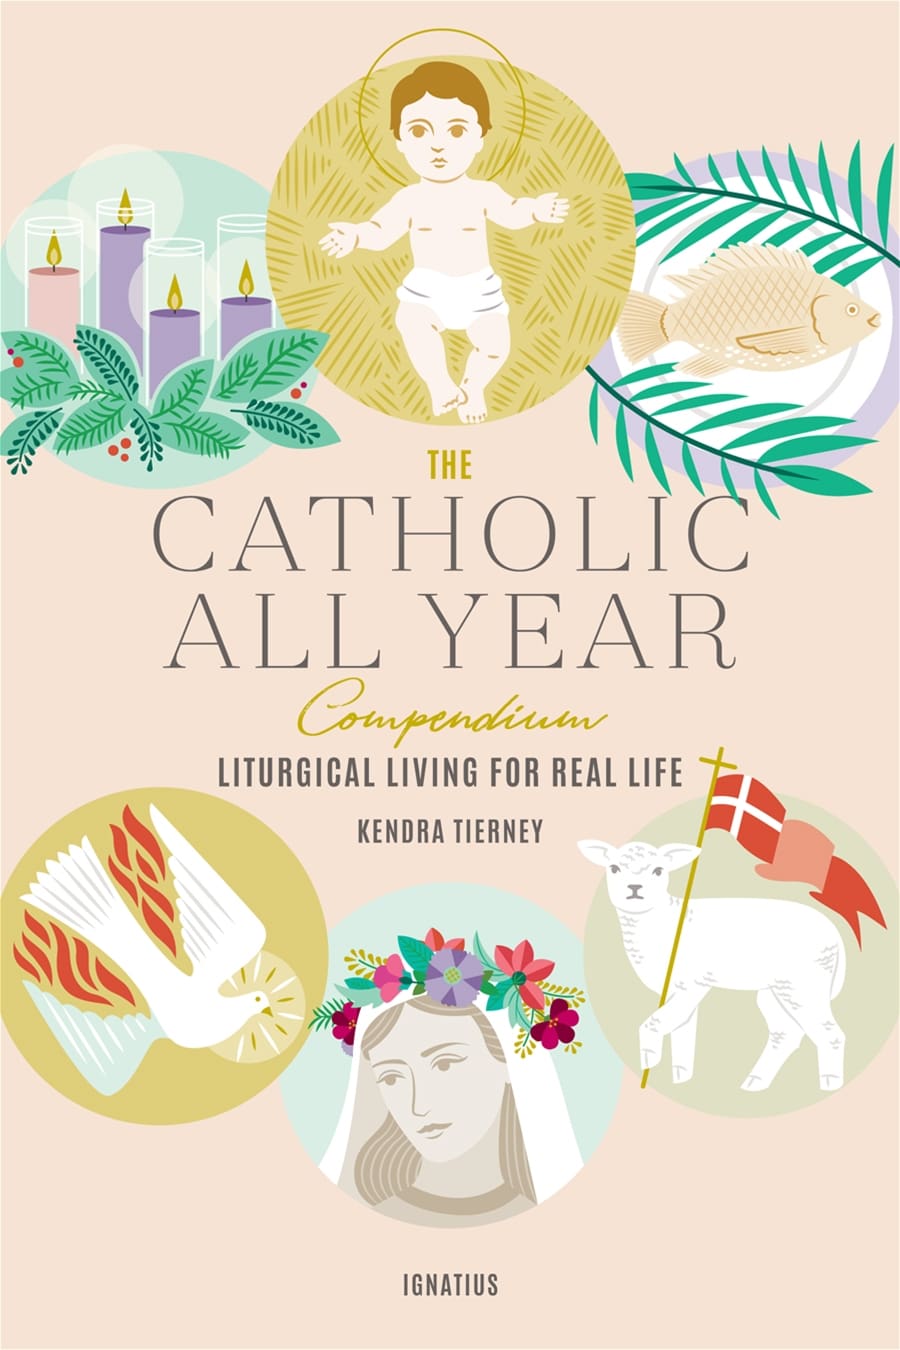 New Book Explores a Year of Living Liturgically